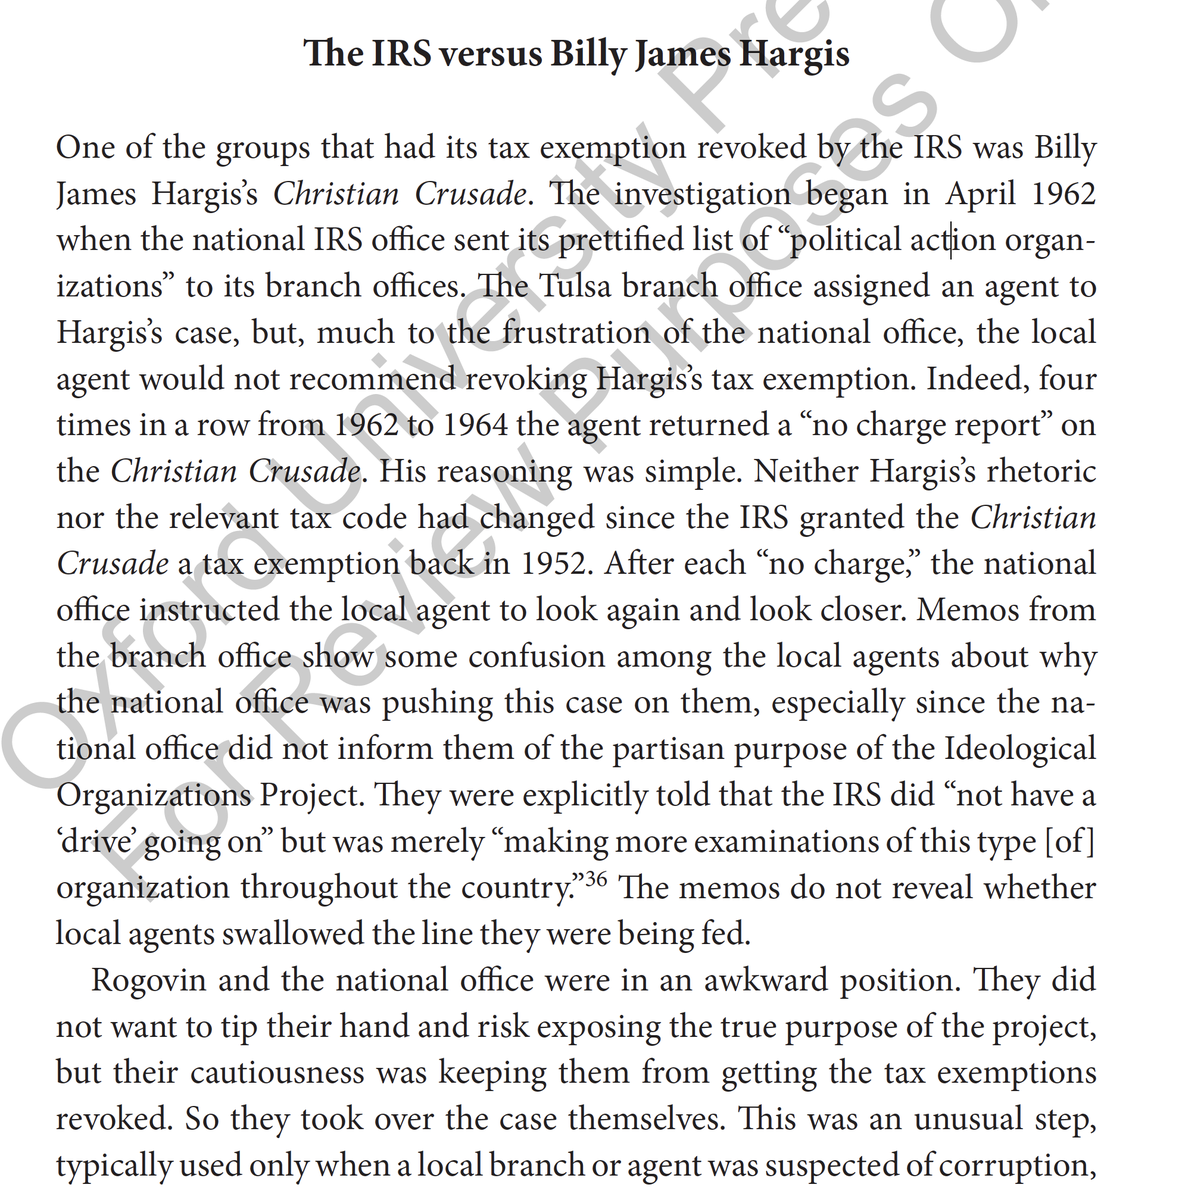 Frustratingly, the career IRS officials in the local offices kept rebuffing requests by the national office political appointees to investigate broadcasters, notably Billy James Hargis.[Trump wasn't the only President to be annoyed by the "deep state."]